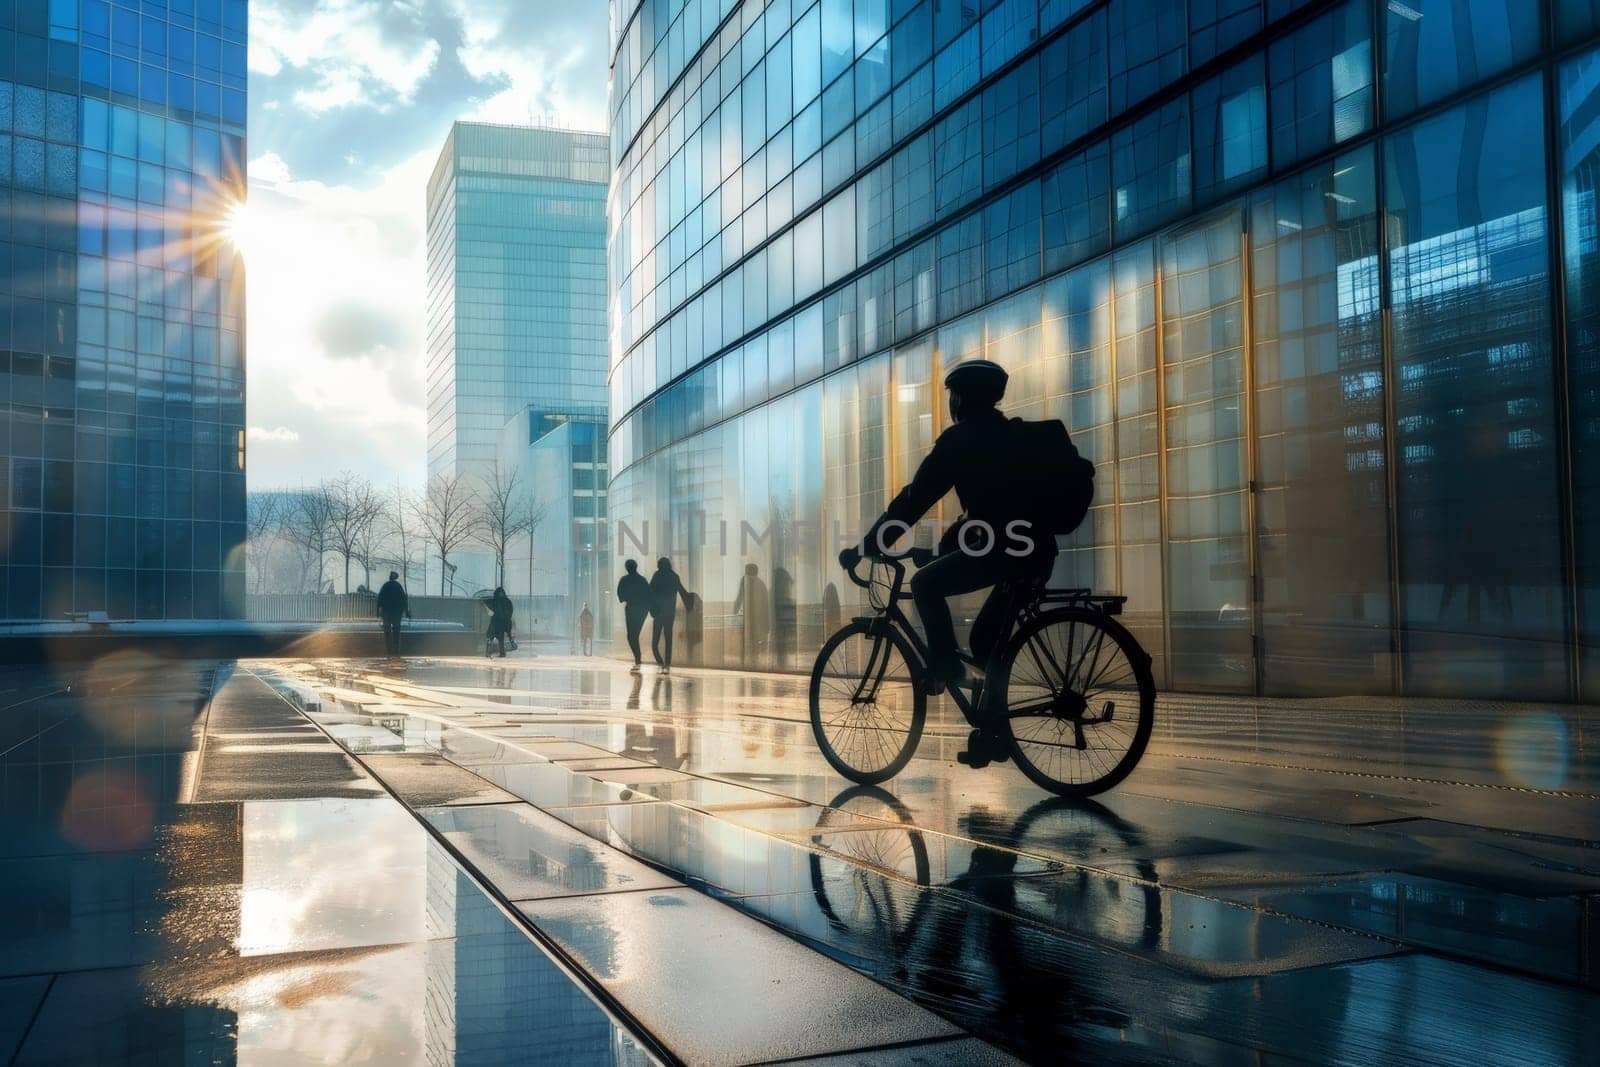 A man rides a bicycle in a city with a cloudy sky. The man is wearing a backpack